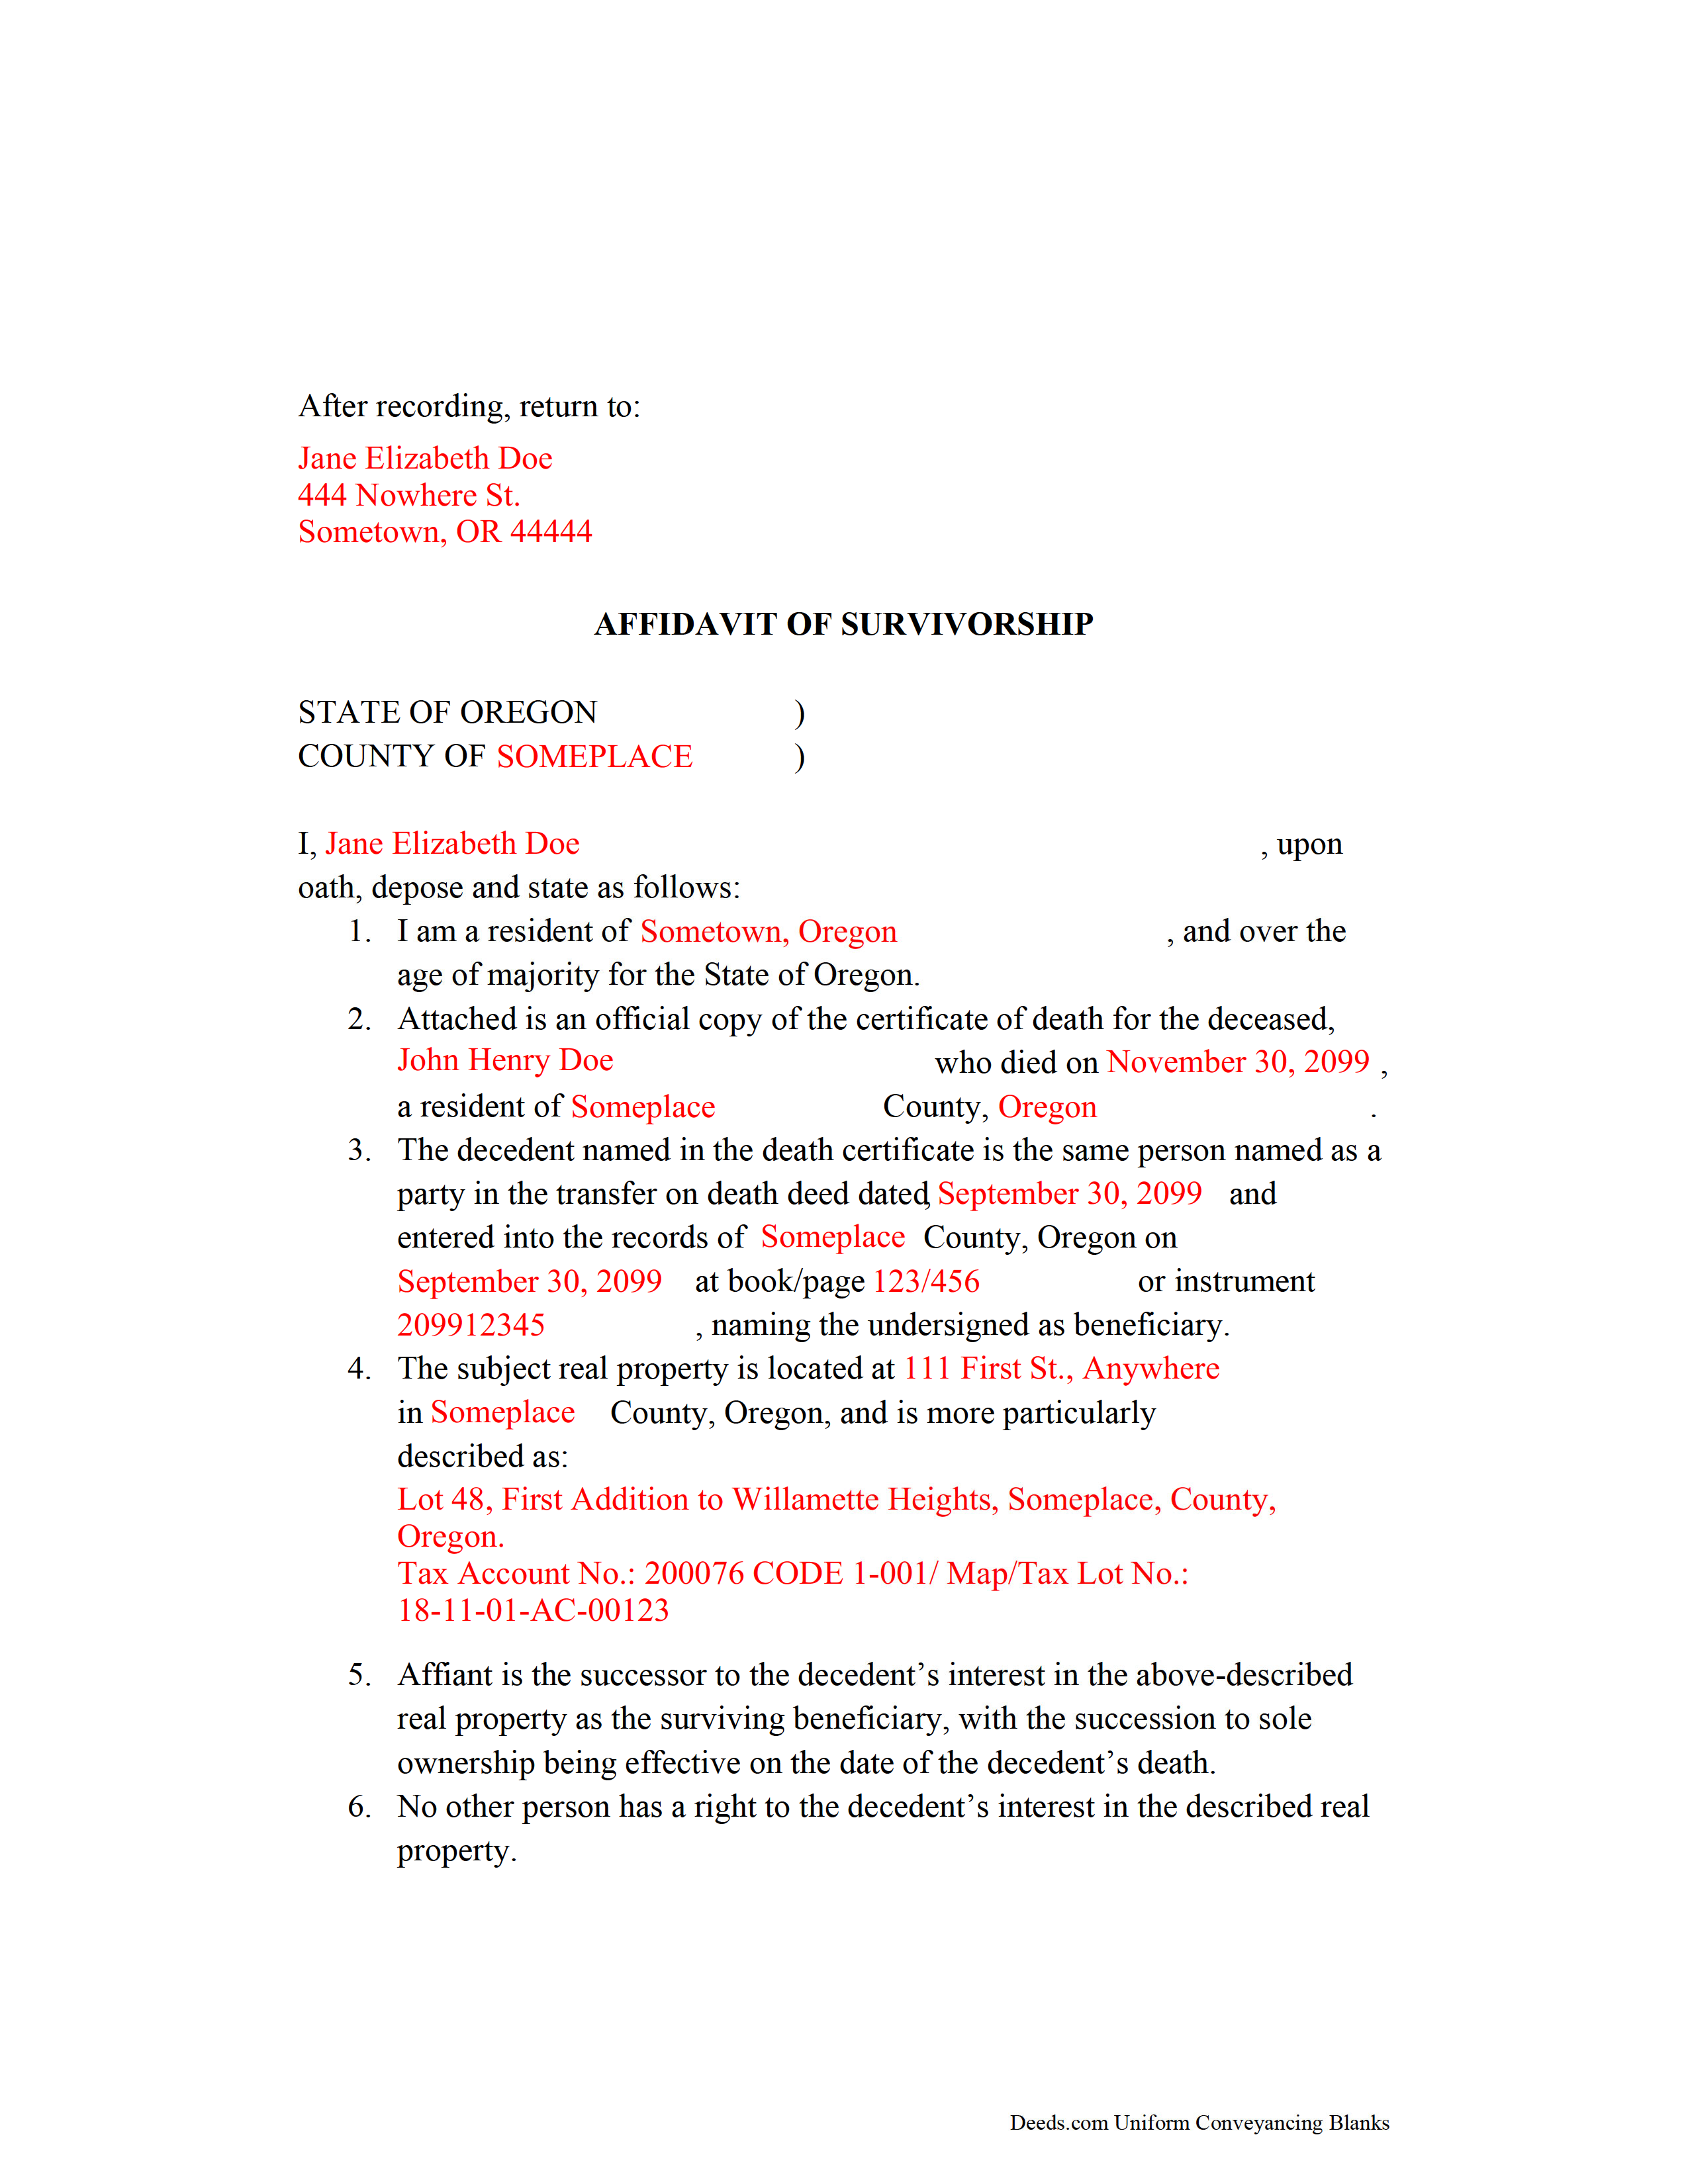 Completed Example of the Transfer on Death Affidavit of Survivorship Document